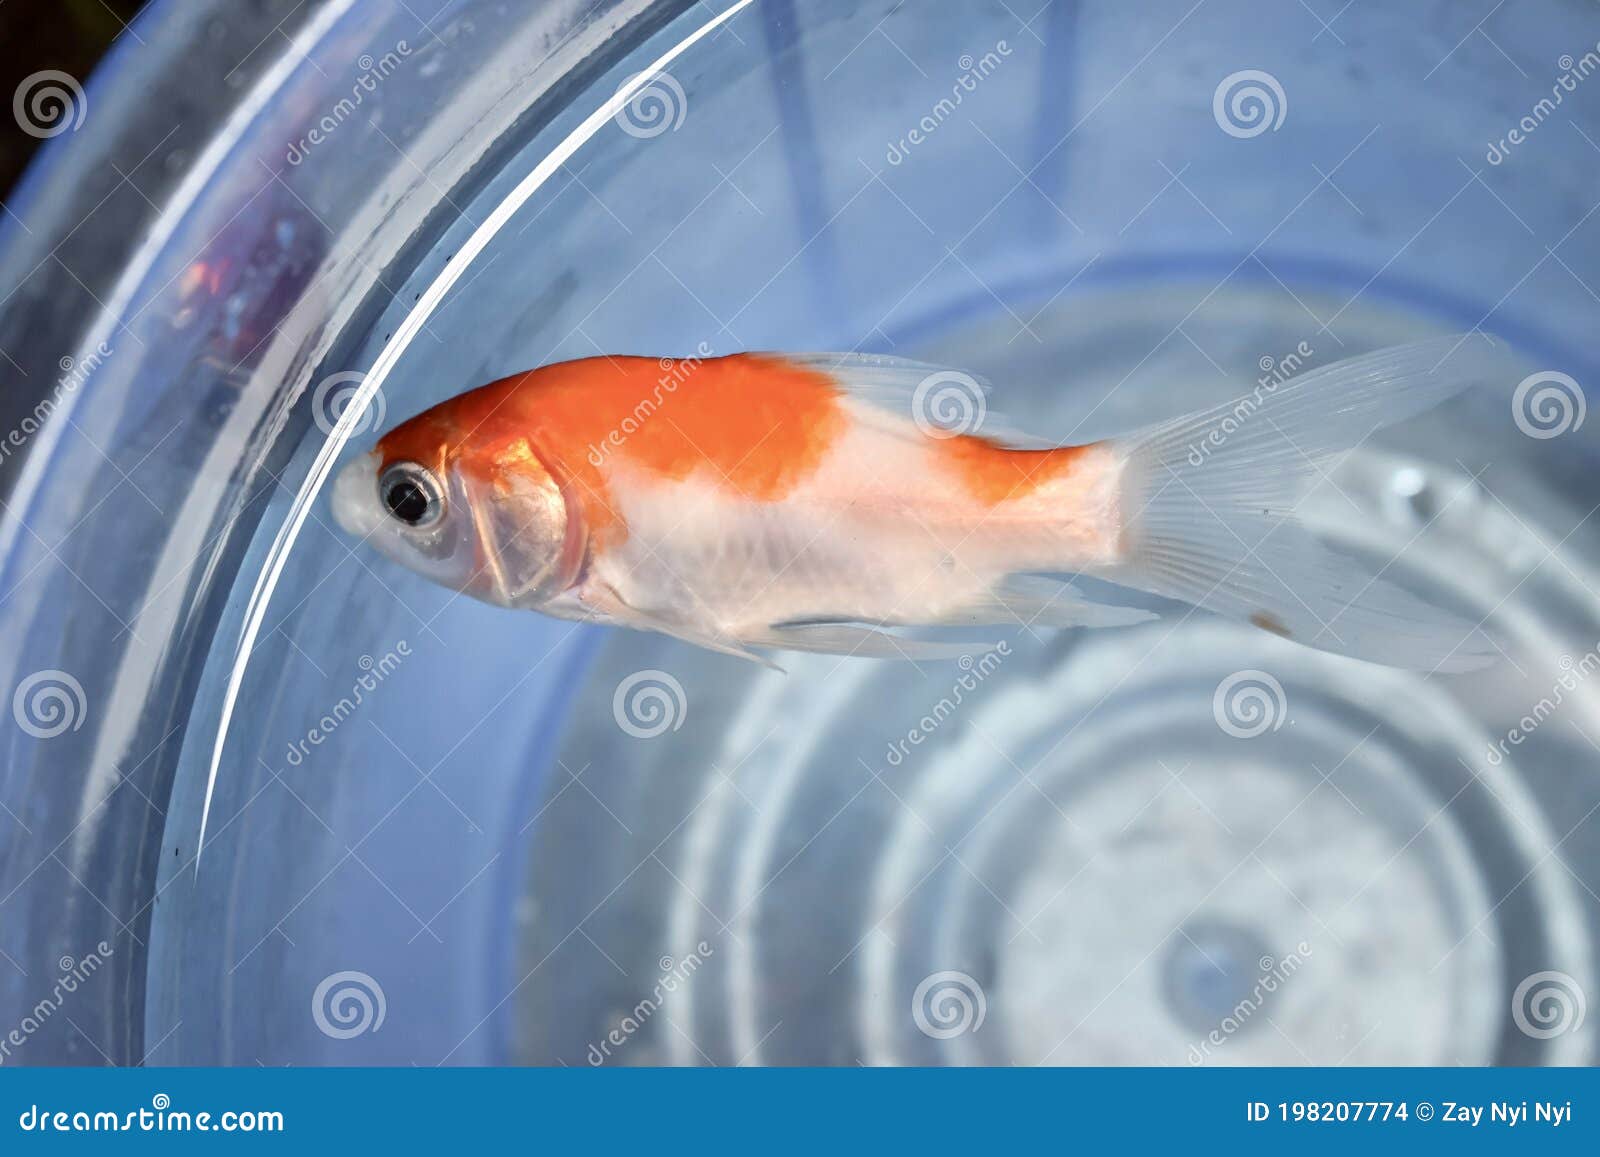 Comet or Common Goldfish Died Due To Poor Water Quality I.e.